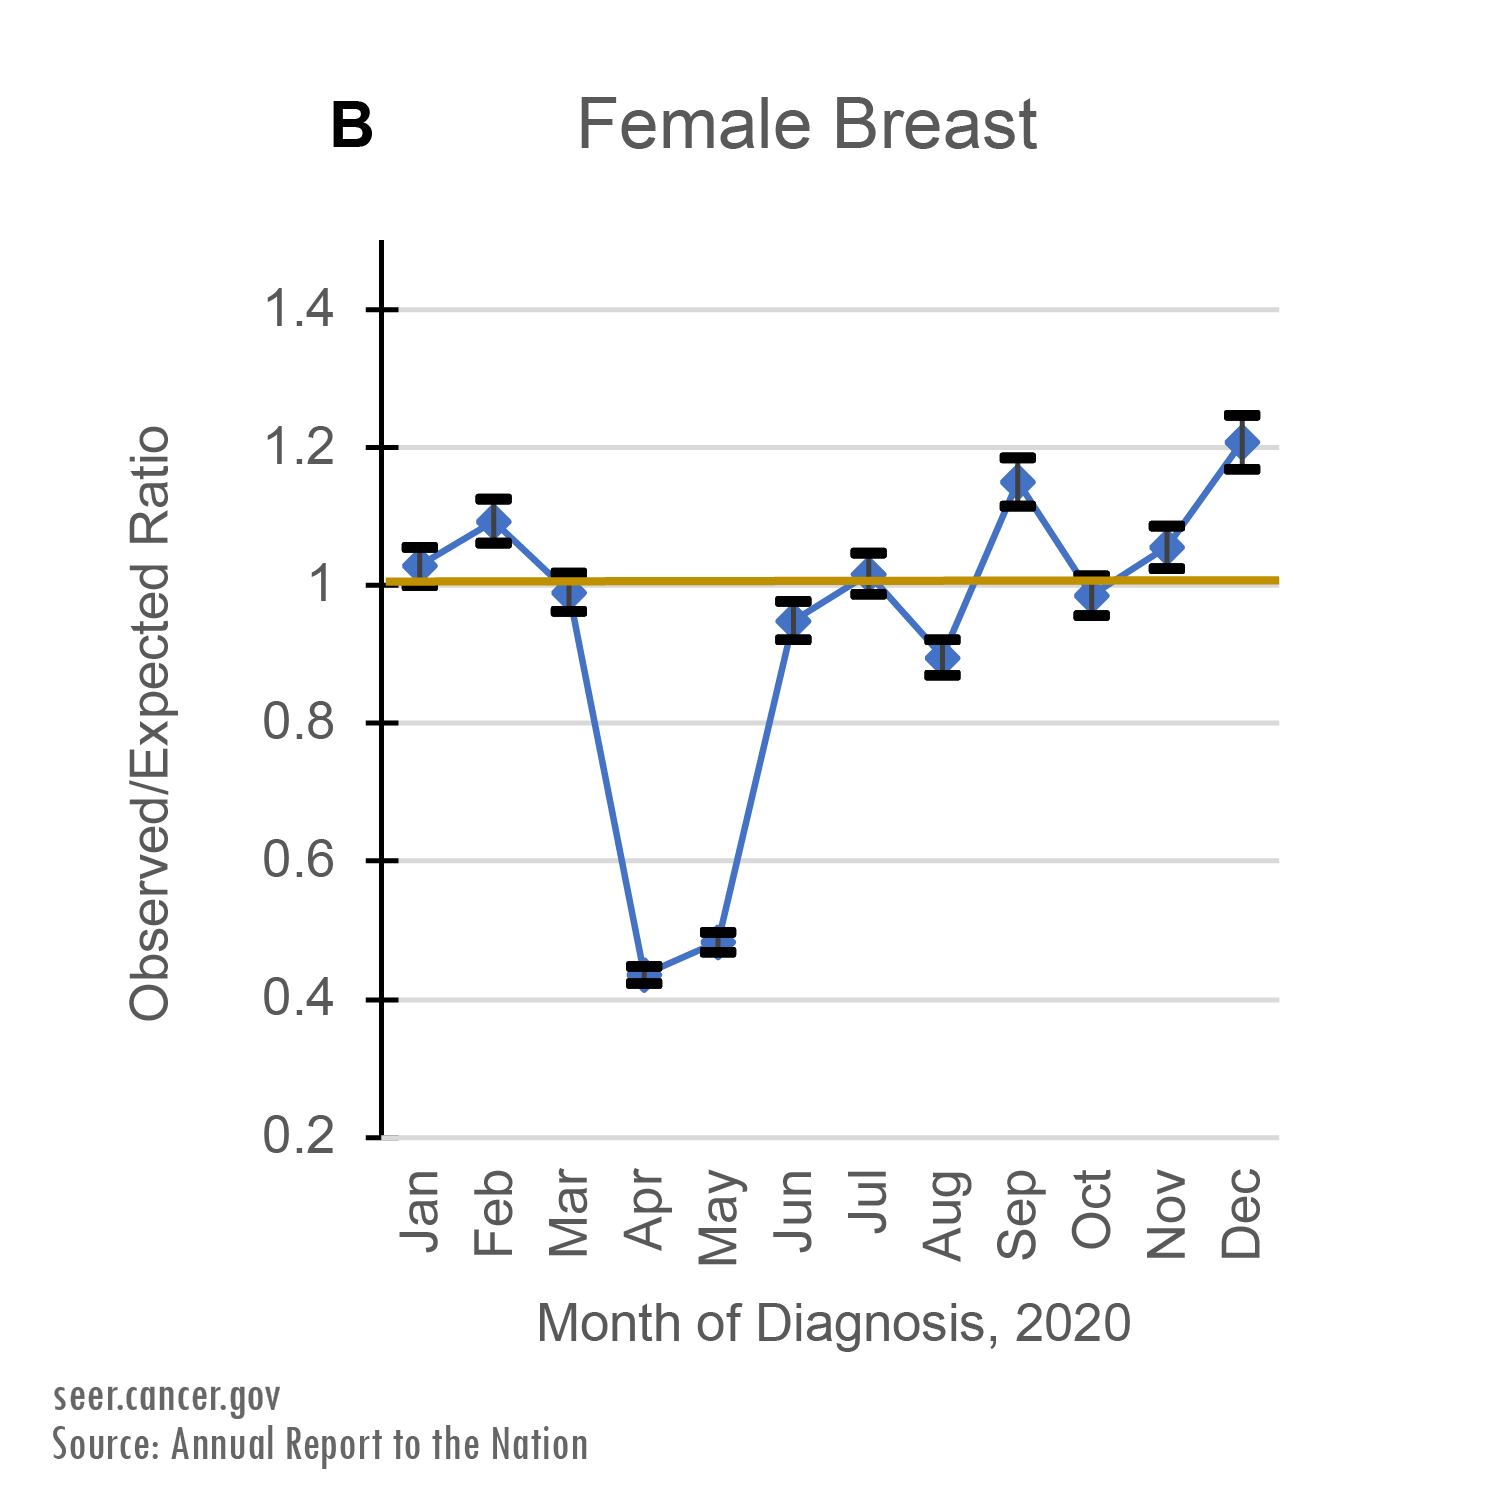 Observed/Expected Ratio of Female Breast cancer diagnoses by Month of Diagnosis, 2020. Between March and May of 2020, cancer registries recorded far fewer cases than expected. While the rate of new cancer diagnoses hovered around predicted levels in the second half of 2020, it did not make up for the drop seen between March and May.